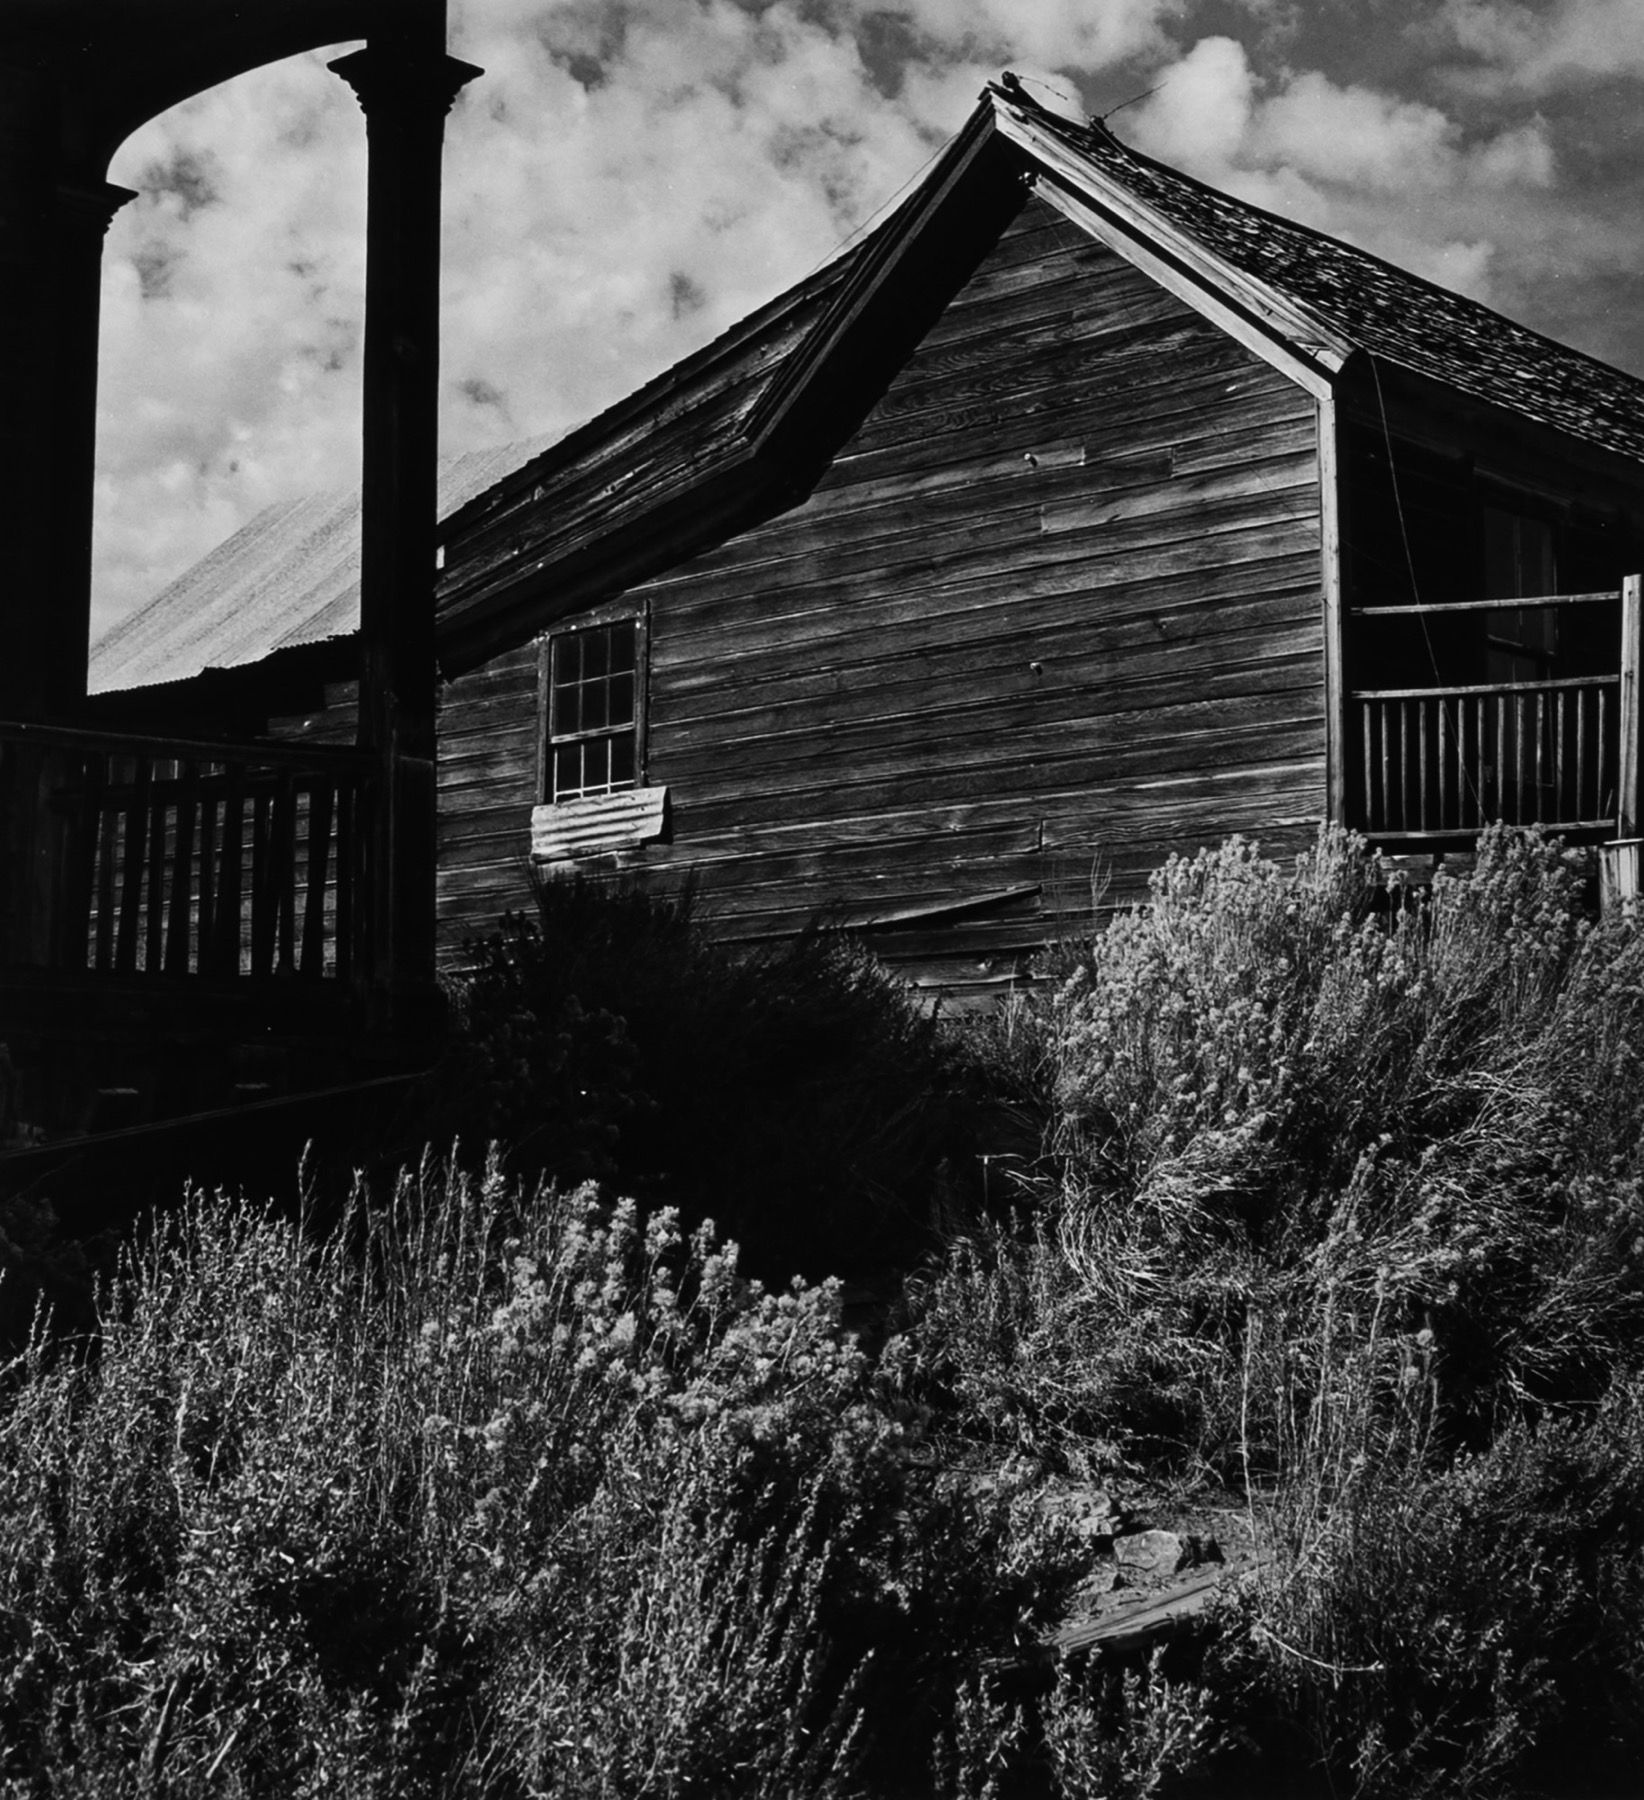 George Tice From the series "Bodie", 1965

Gelatin silver print, printed later, &hellip;